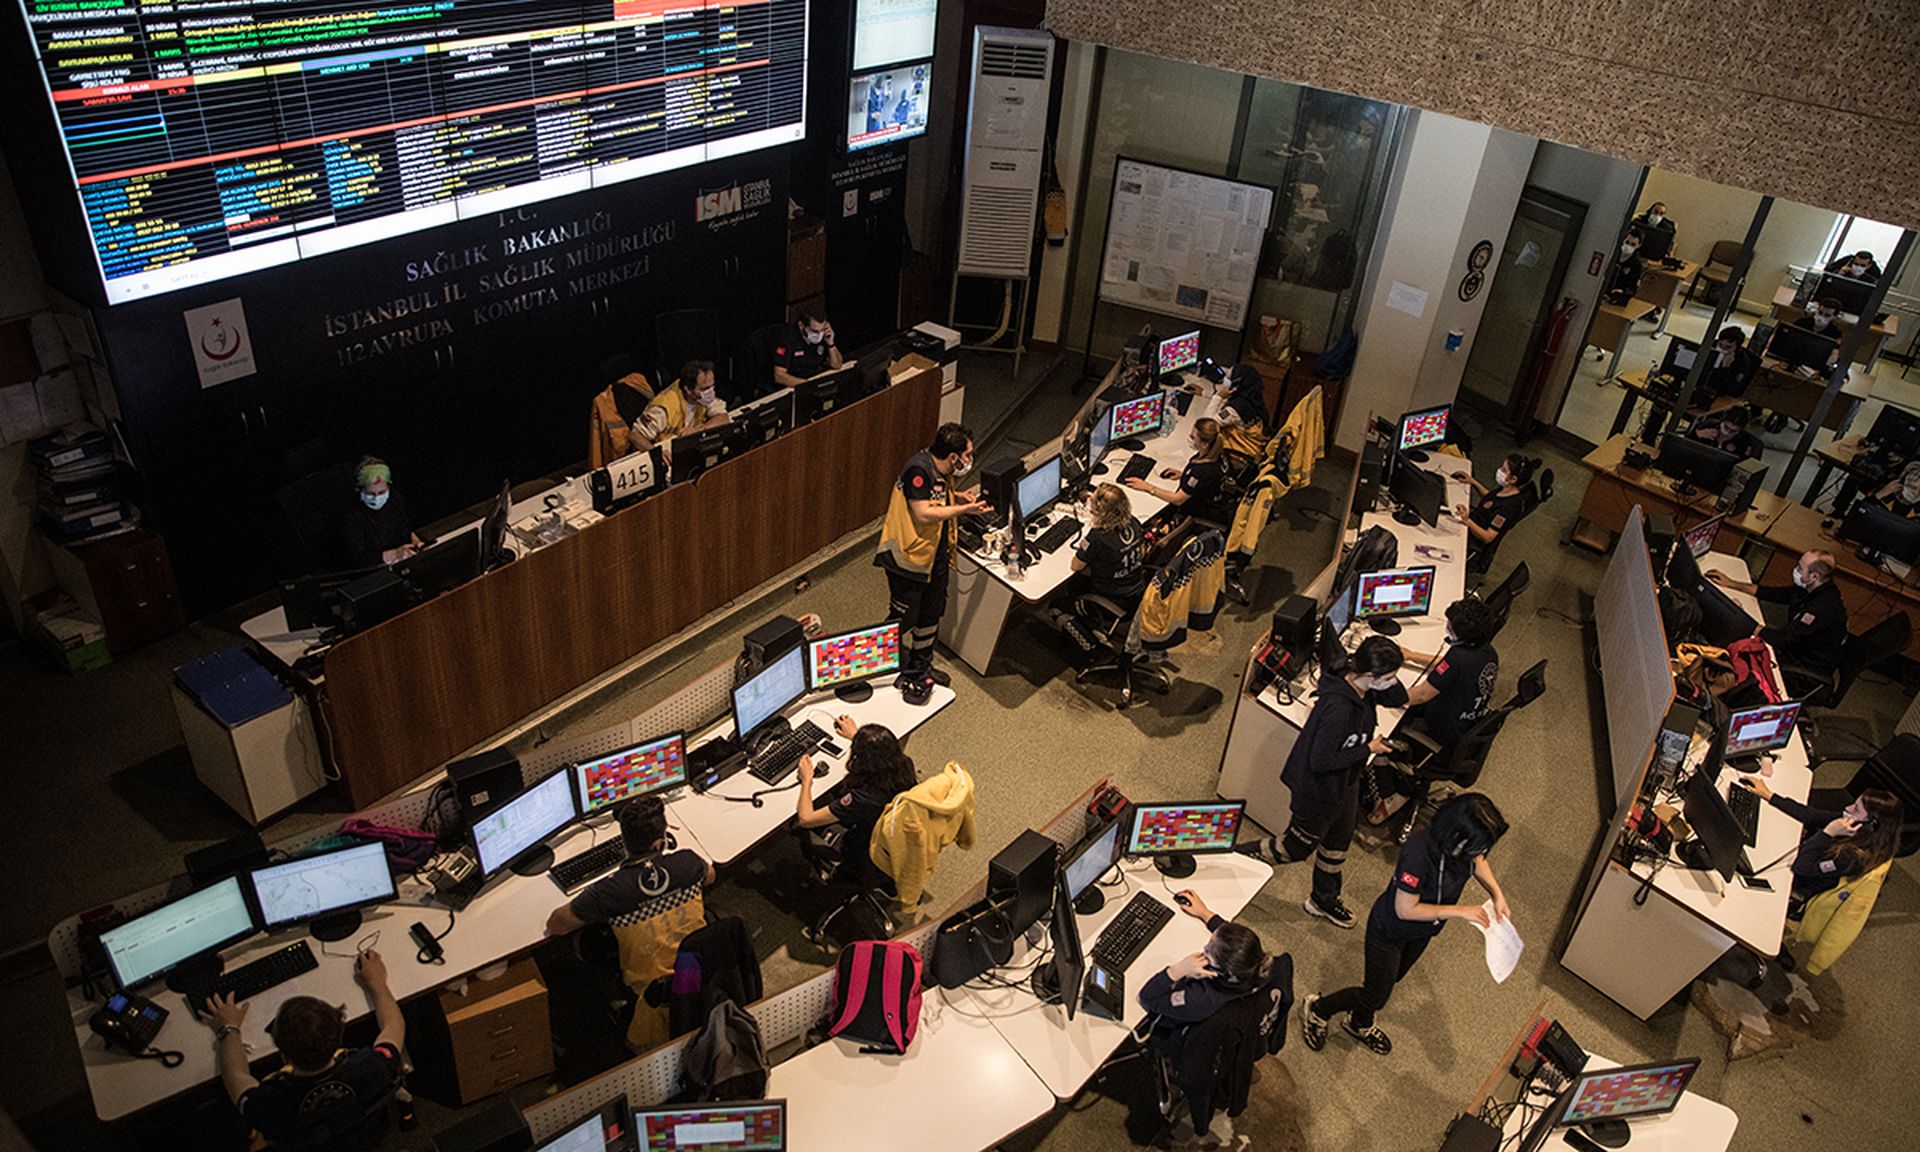 Doctors and paramedics take emergency calls at the 112 Emergency Healthcare services call center headquarters on May 1, 2020, in Istanbul. (Photo by Chris McGrath/Getty Images)